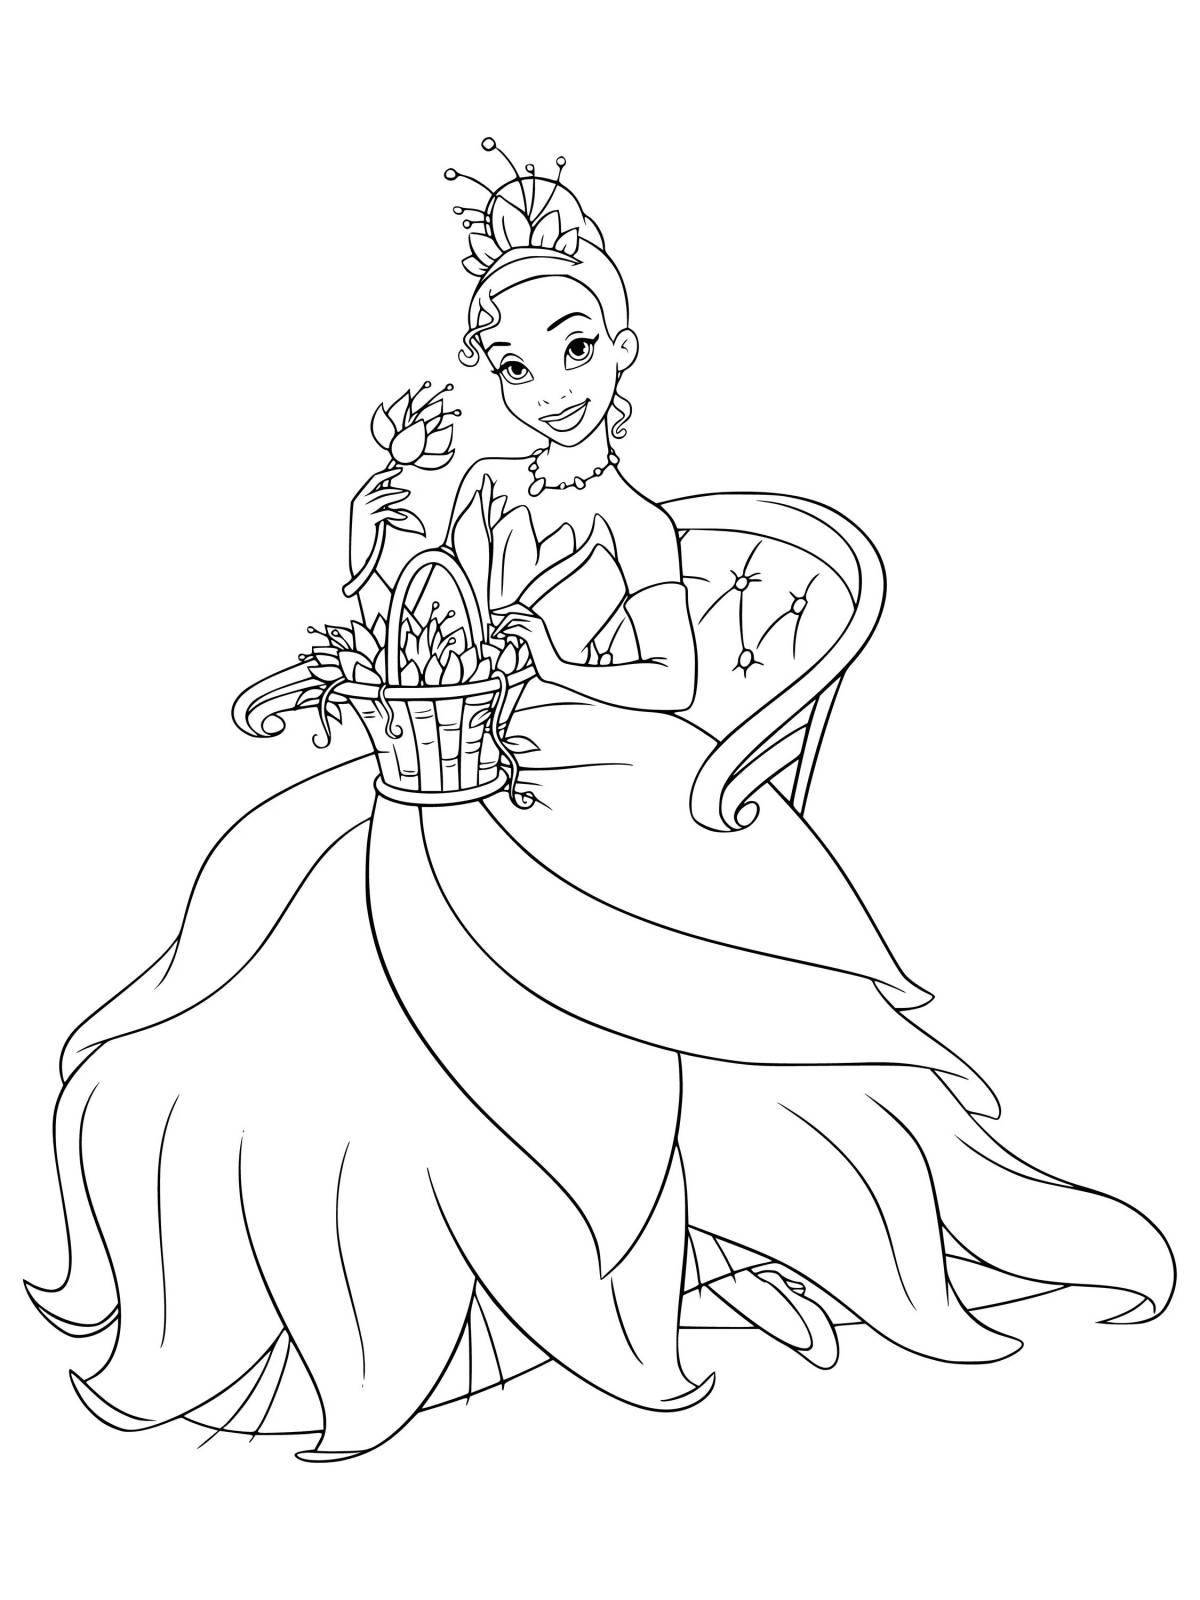 Awesome princess diana coloring page